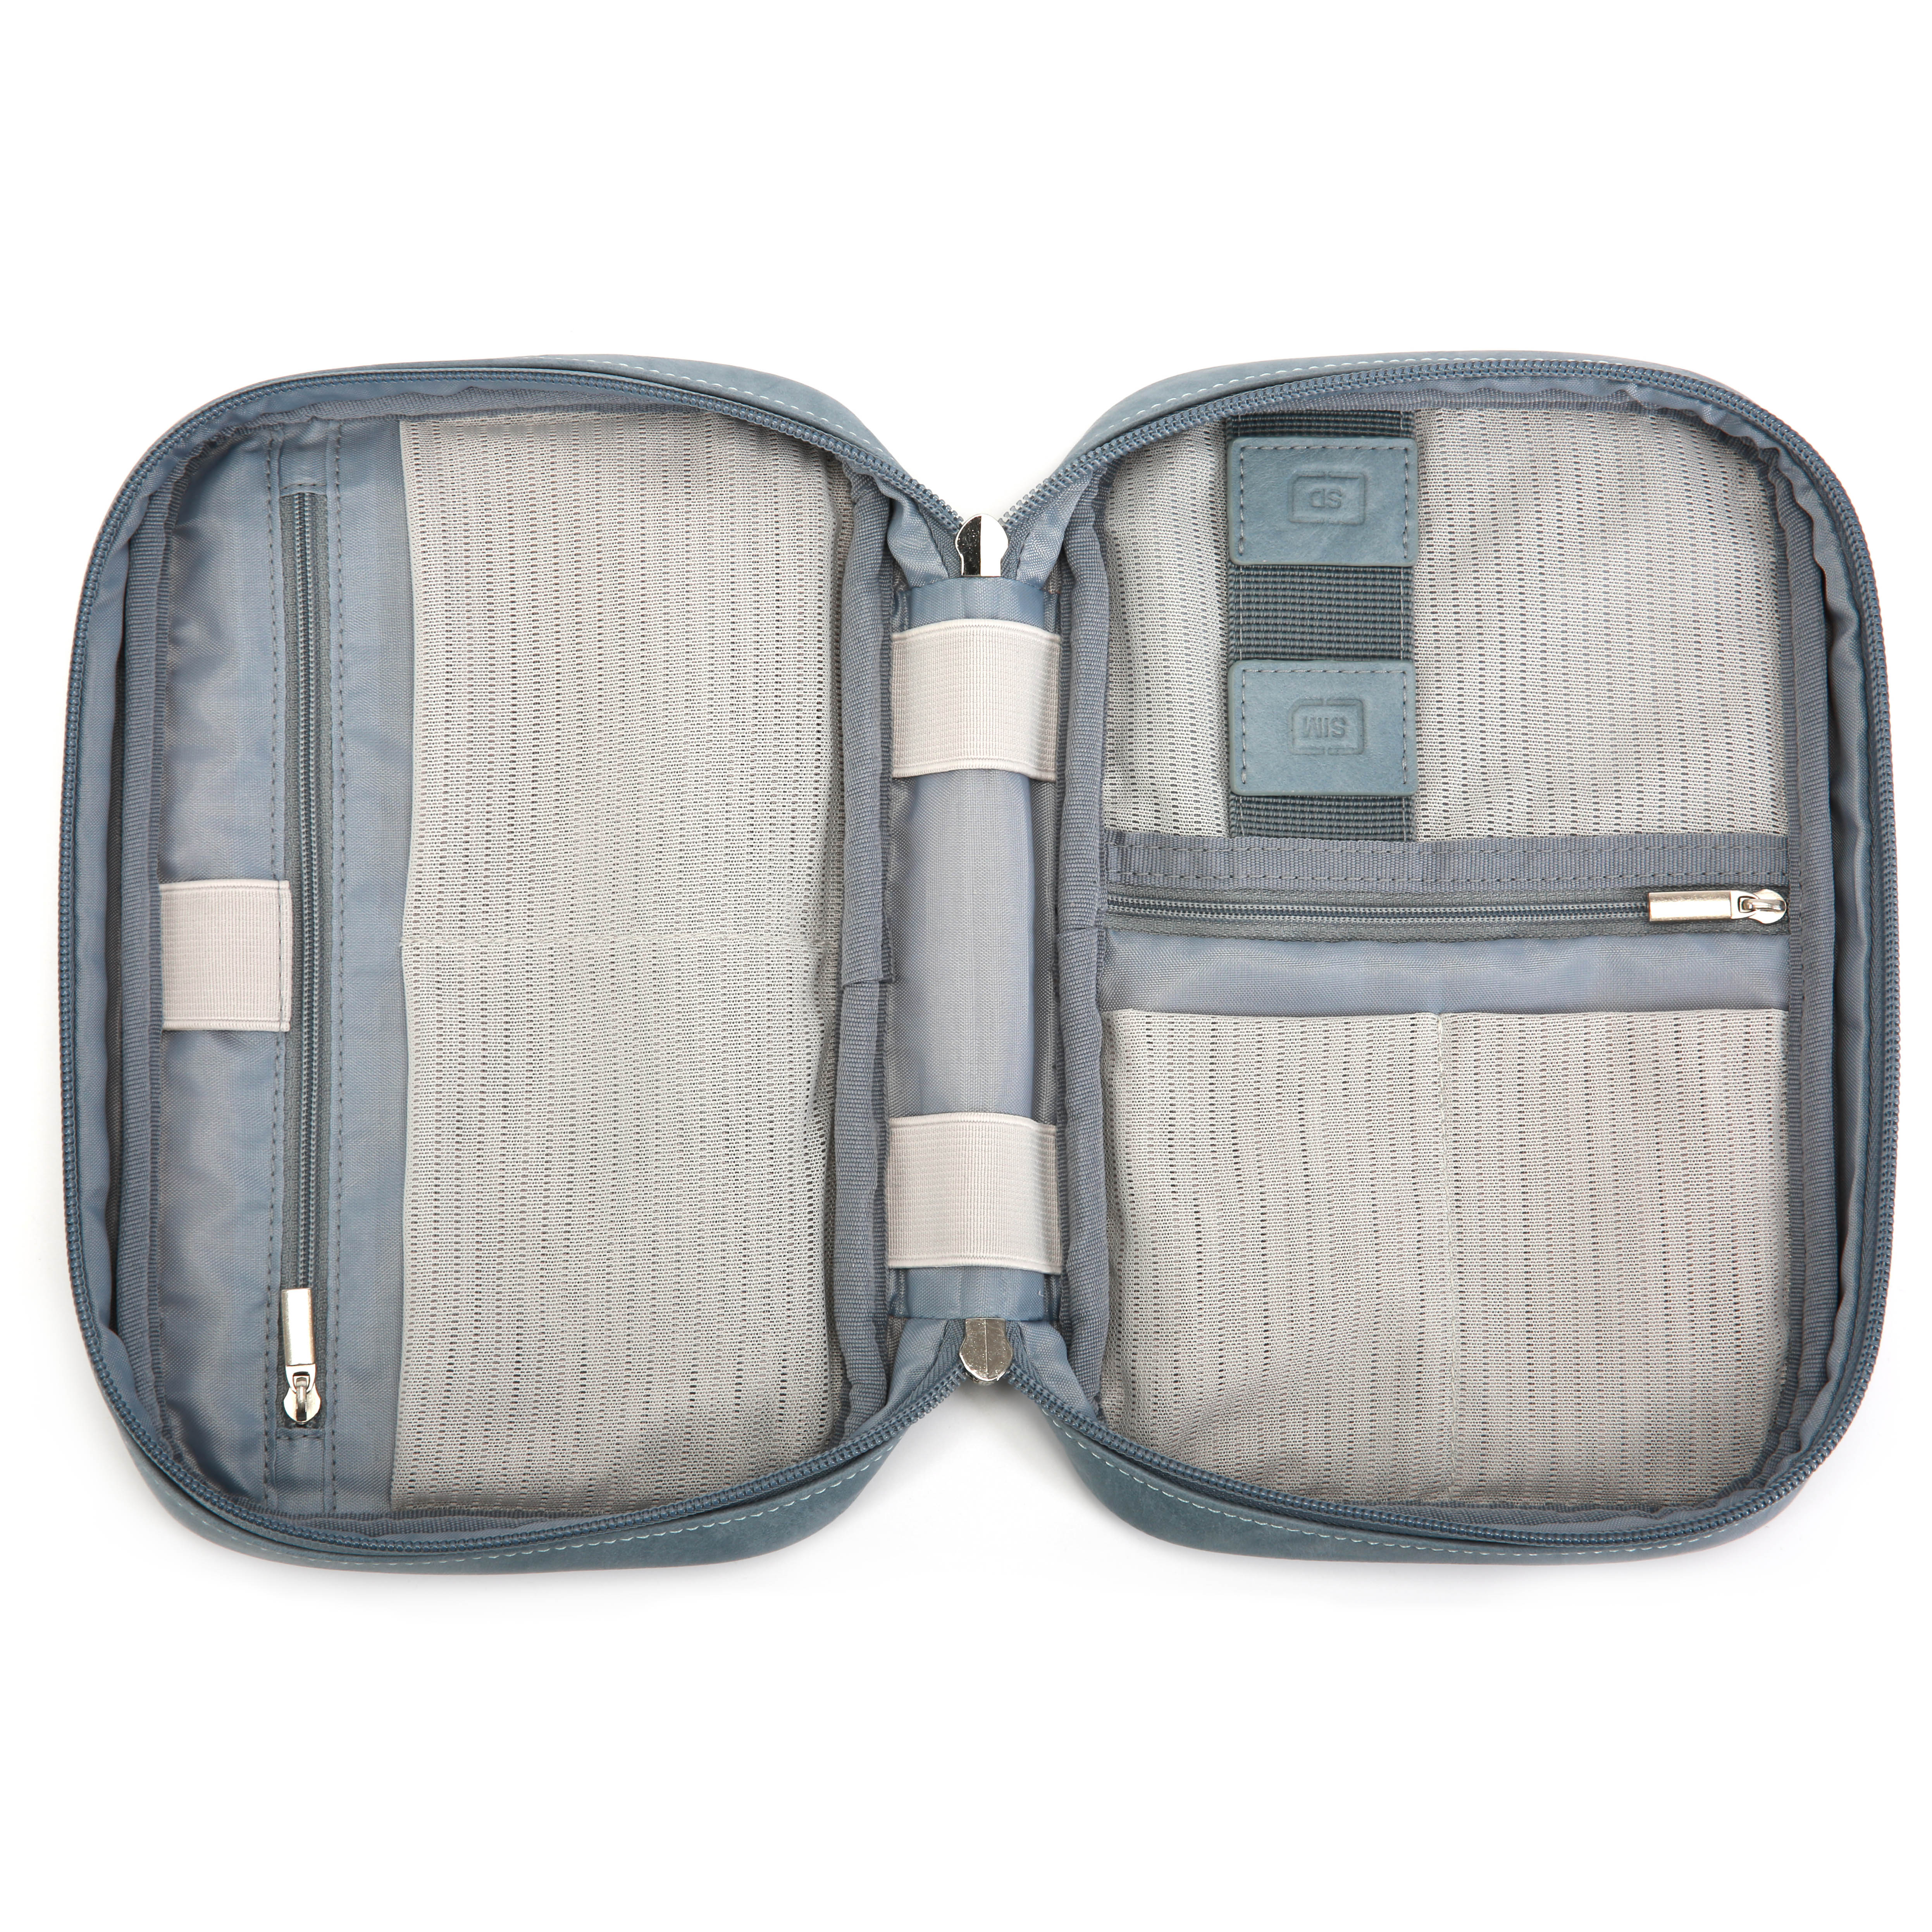 Electronic Accessories Organizer Bag For Travel